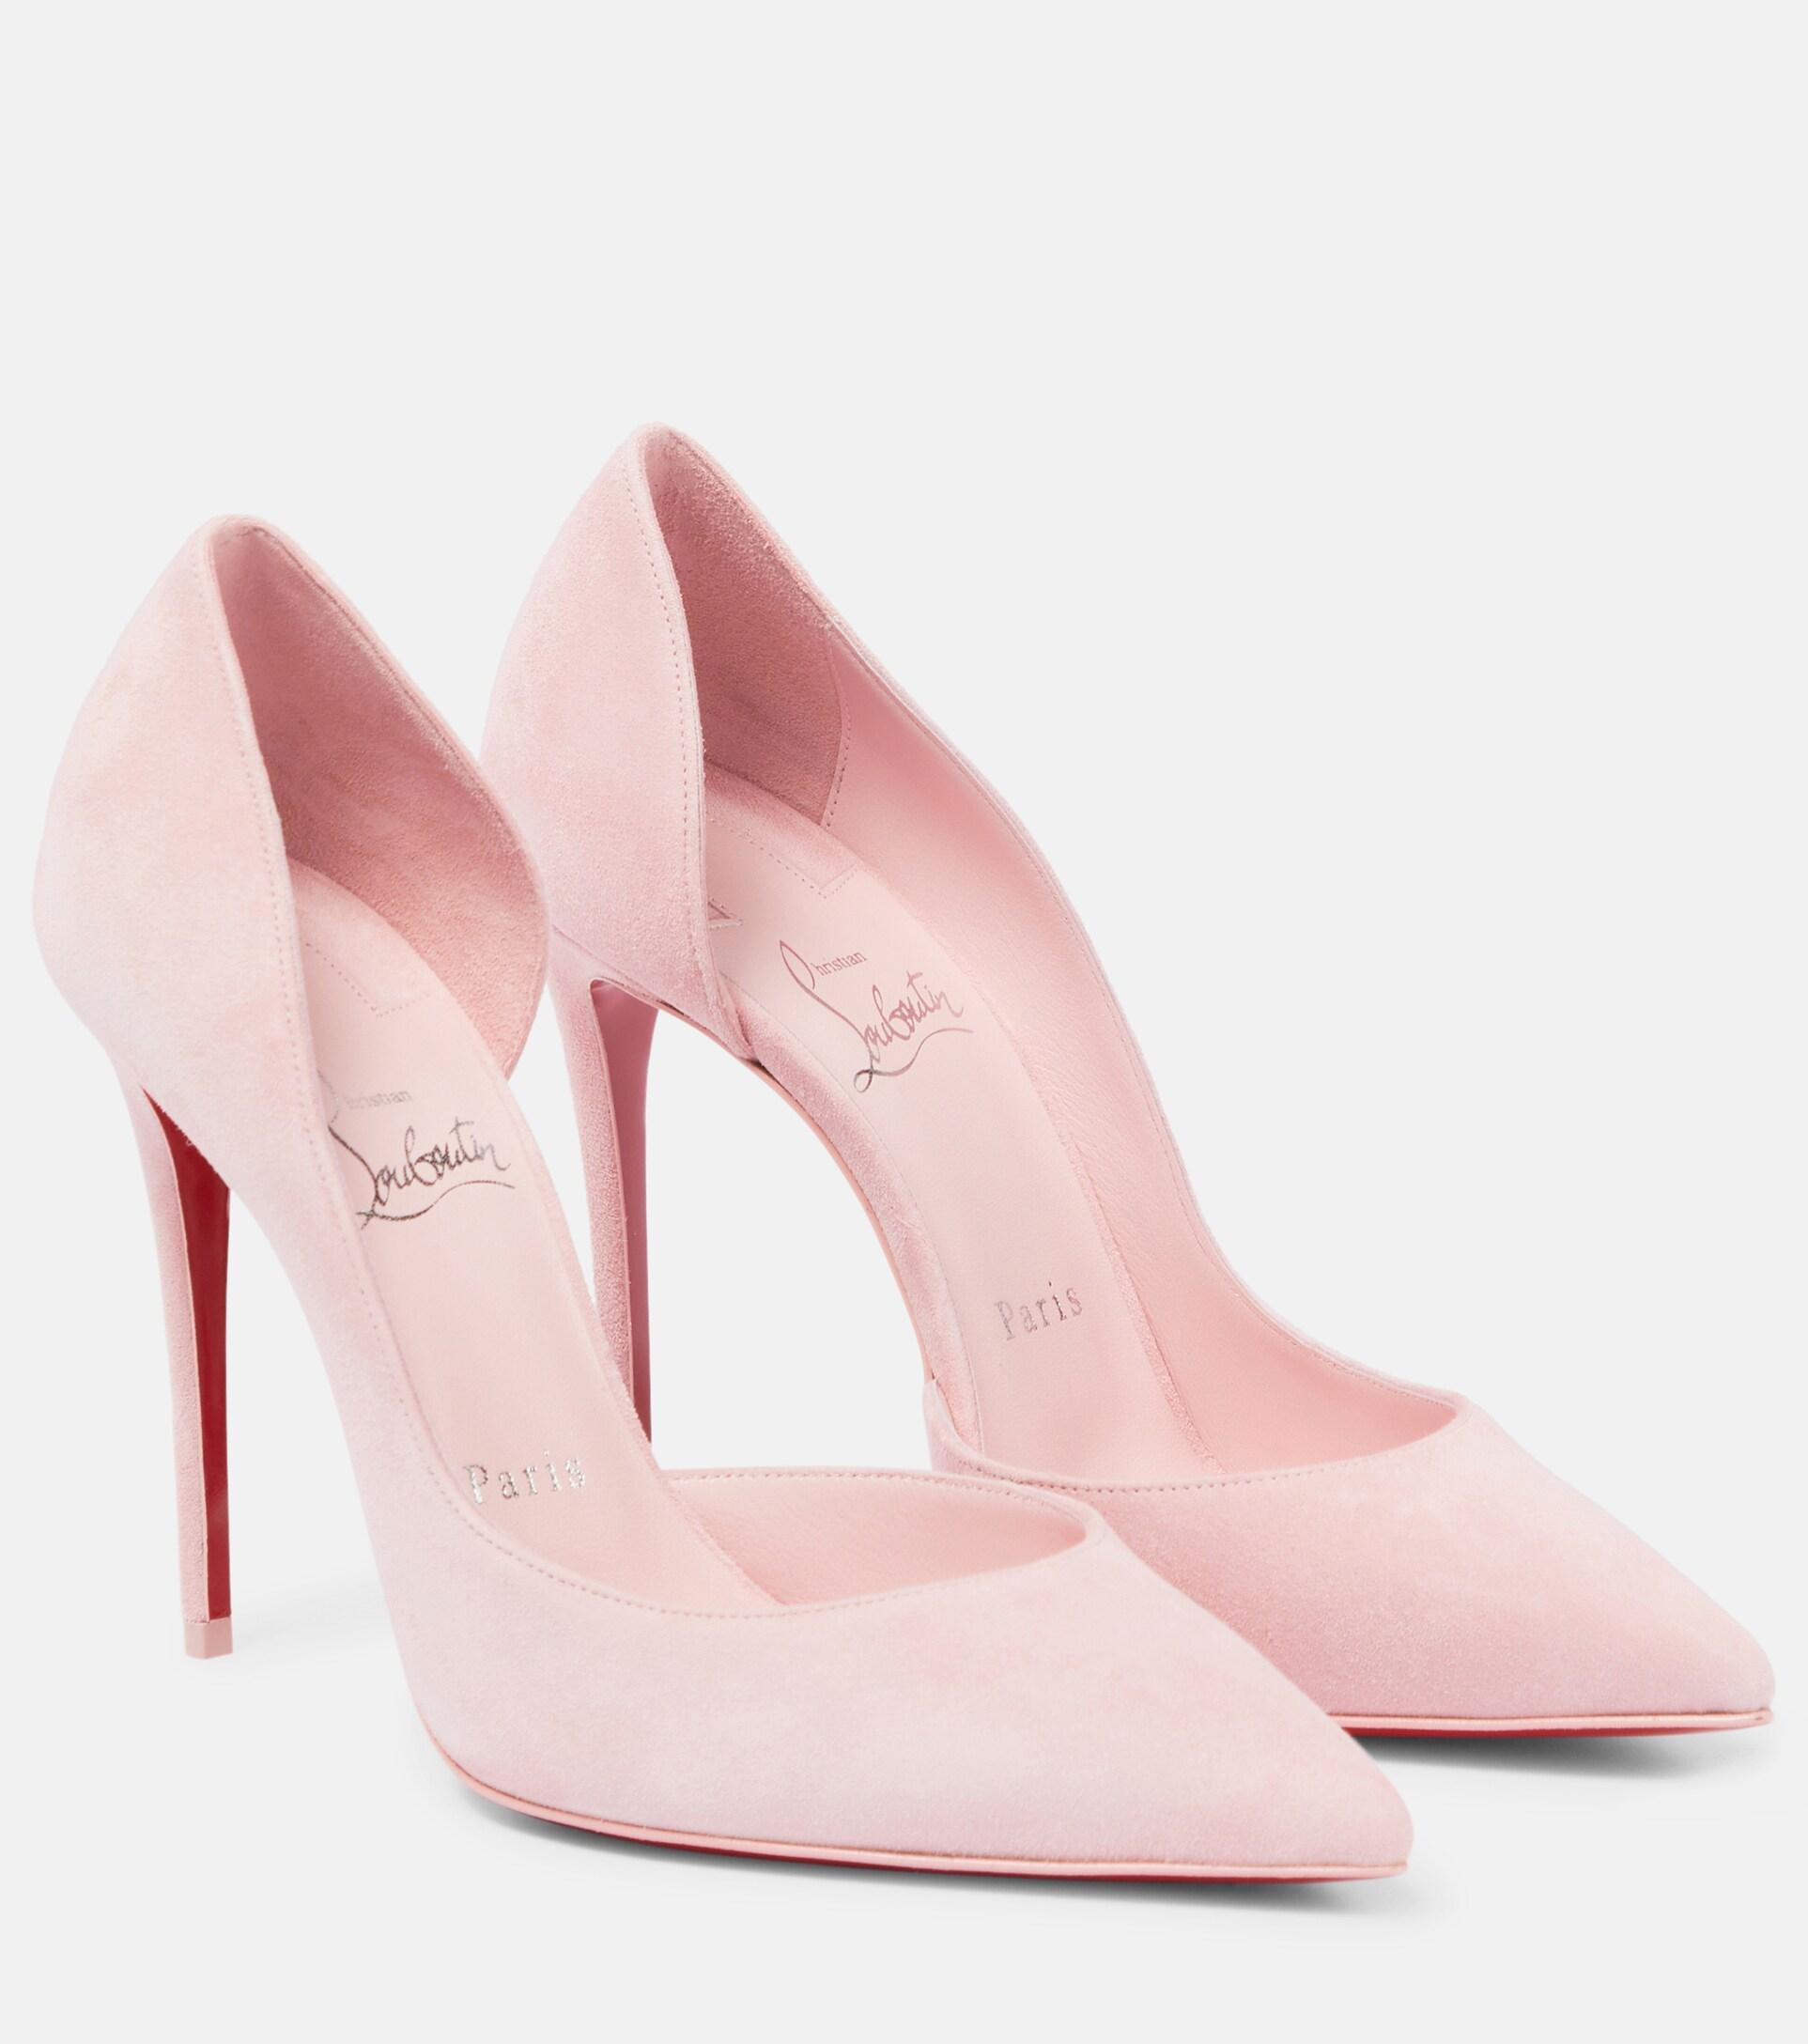 Christian Louboutin Iriza Suede Pumps in Pink | Lyst